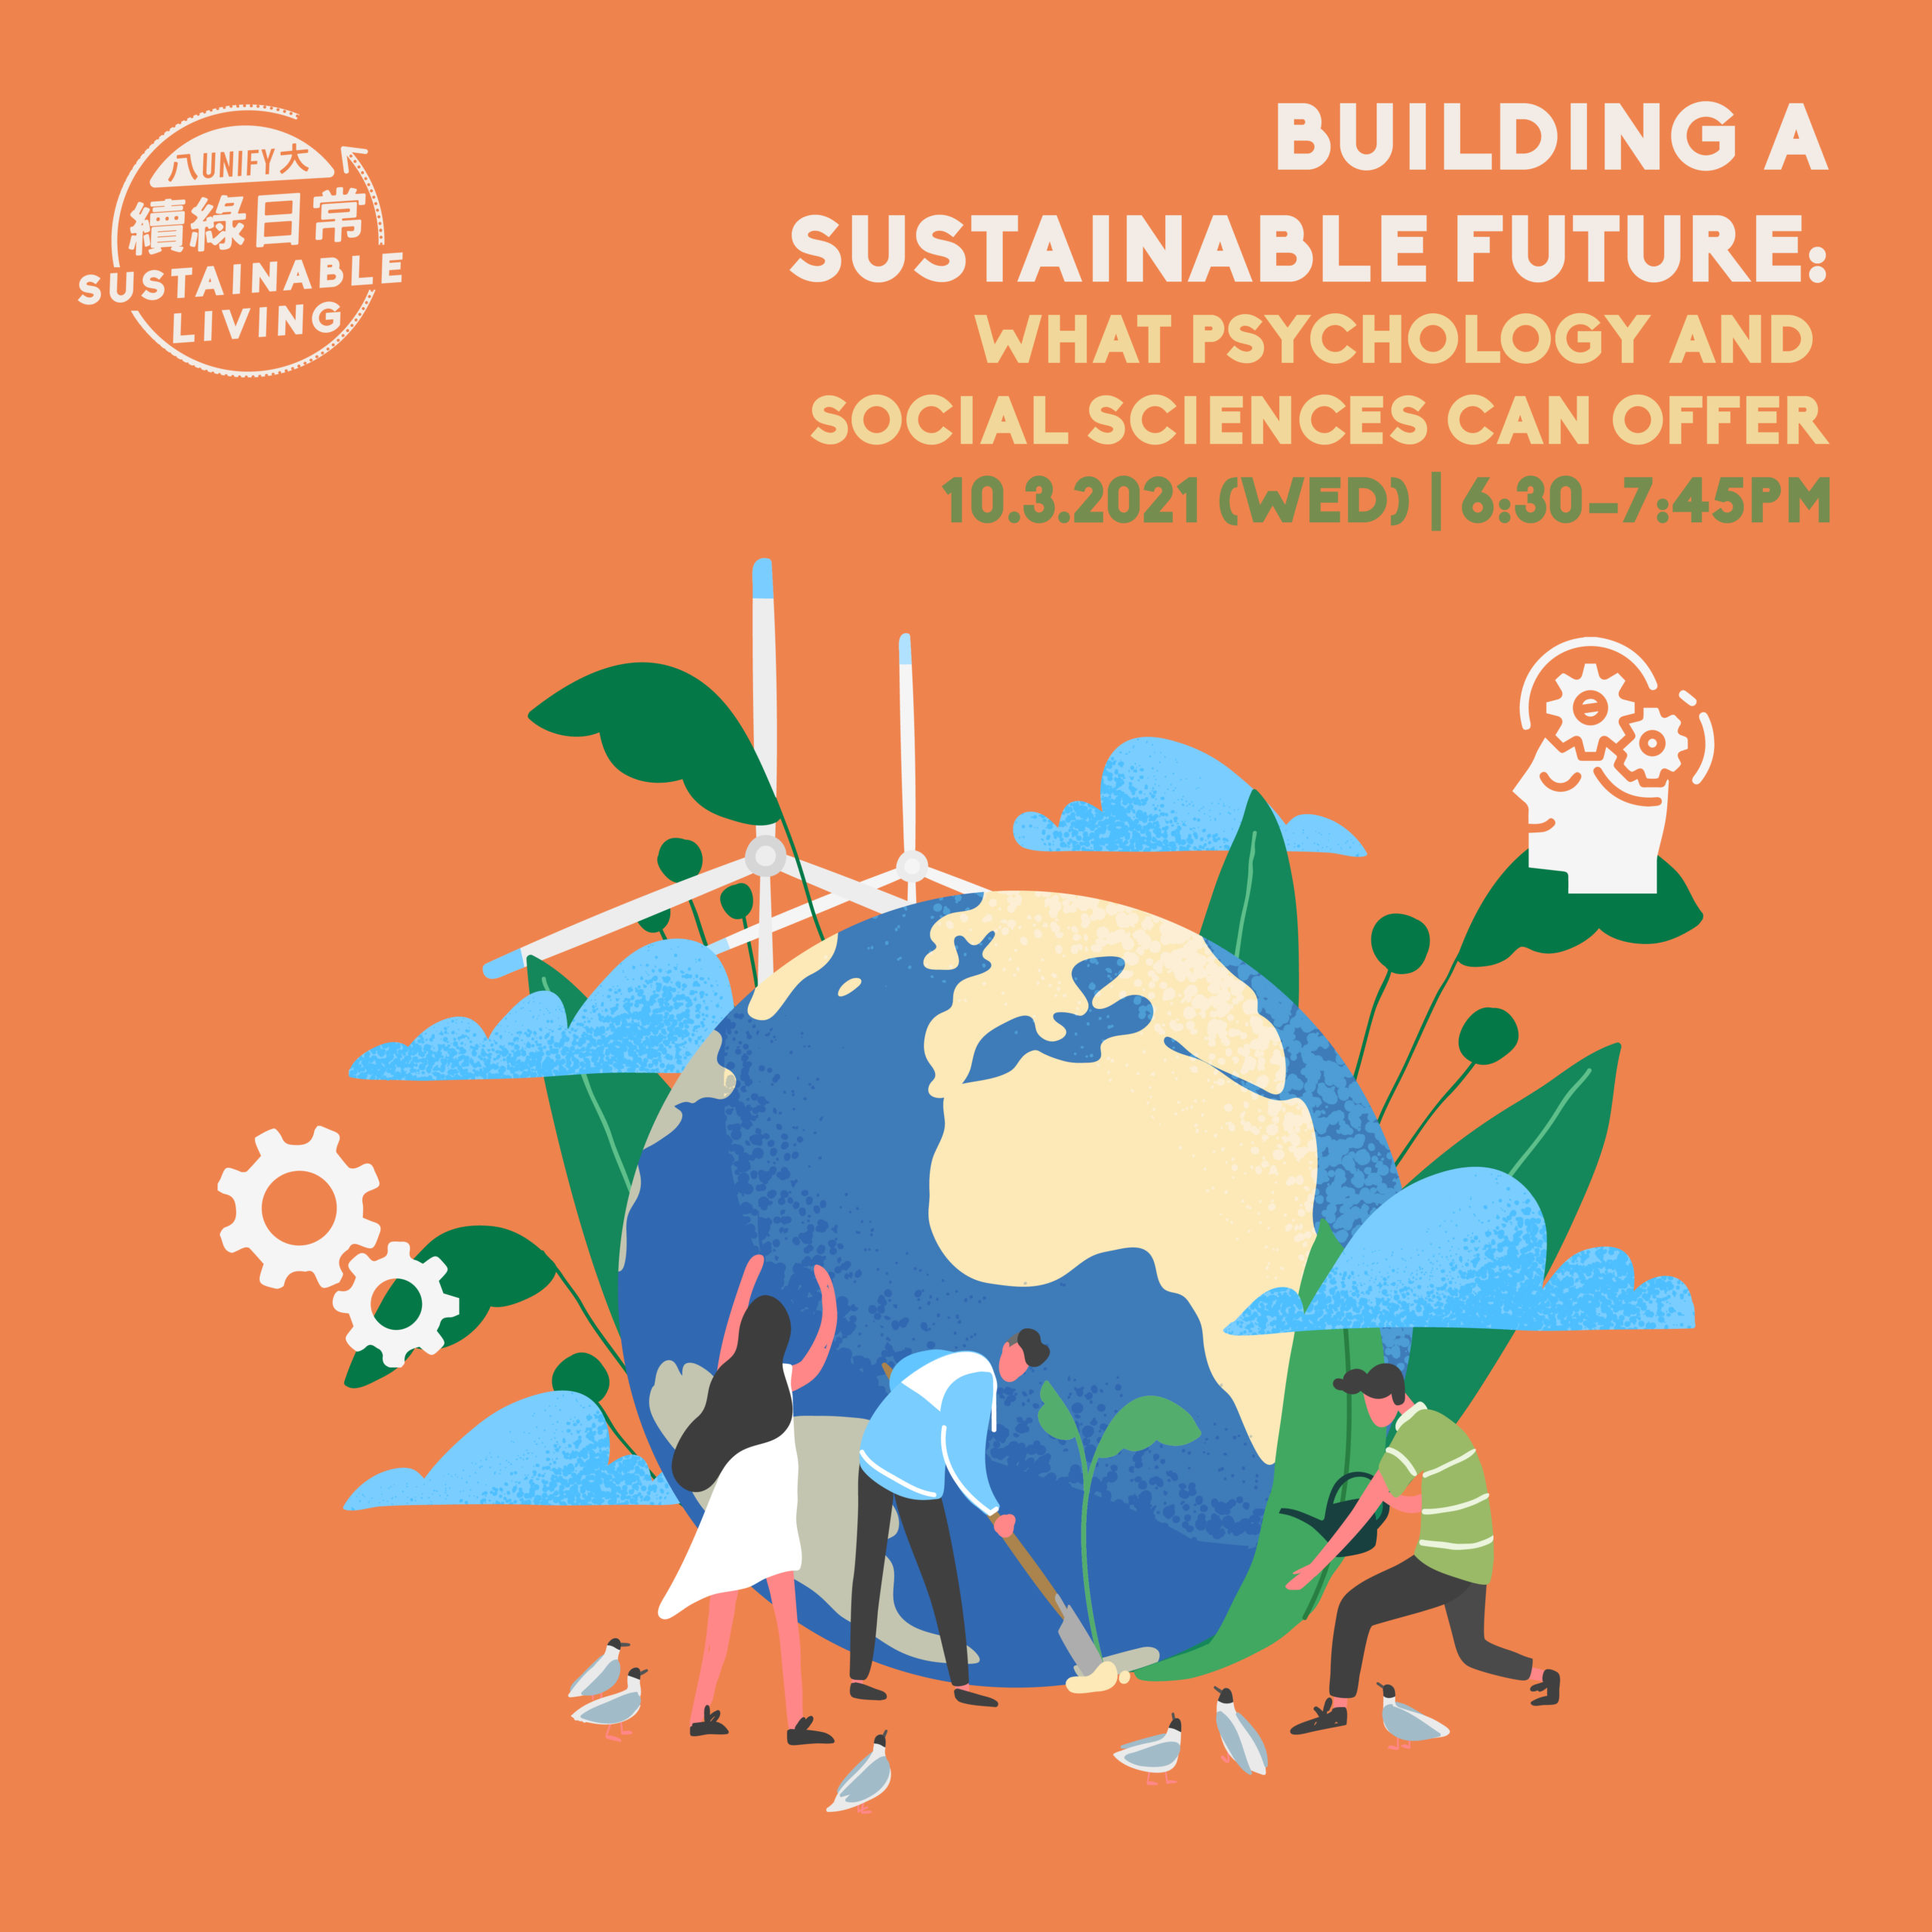 Building a Sustainable Future: What Psychology and Social Sciences Can Offer